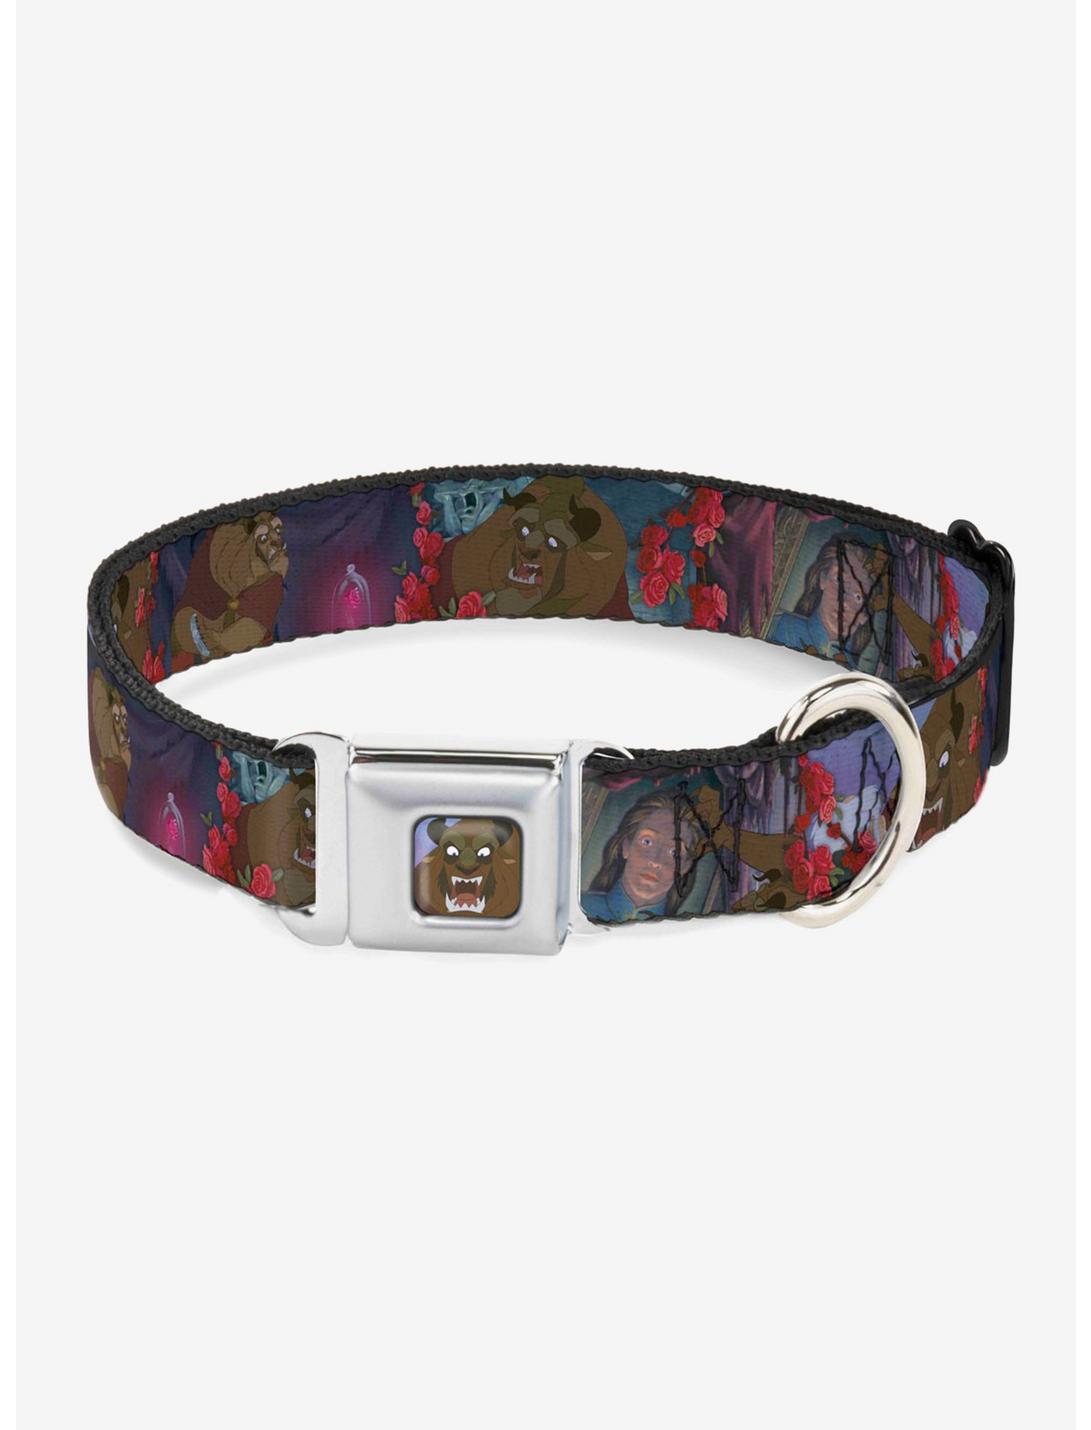 Disney Beauty And The Beast Roses Seatbelt Buckle Dog Collar, MULTICOLOR, hi-res